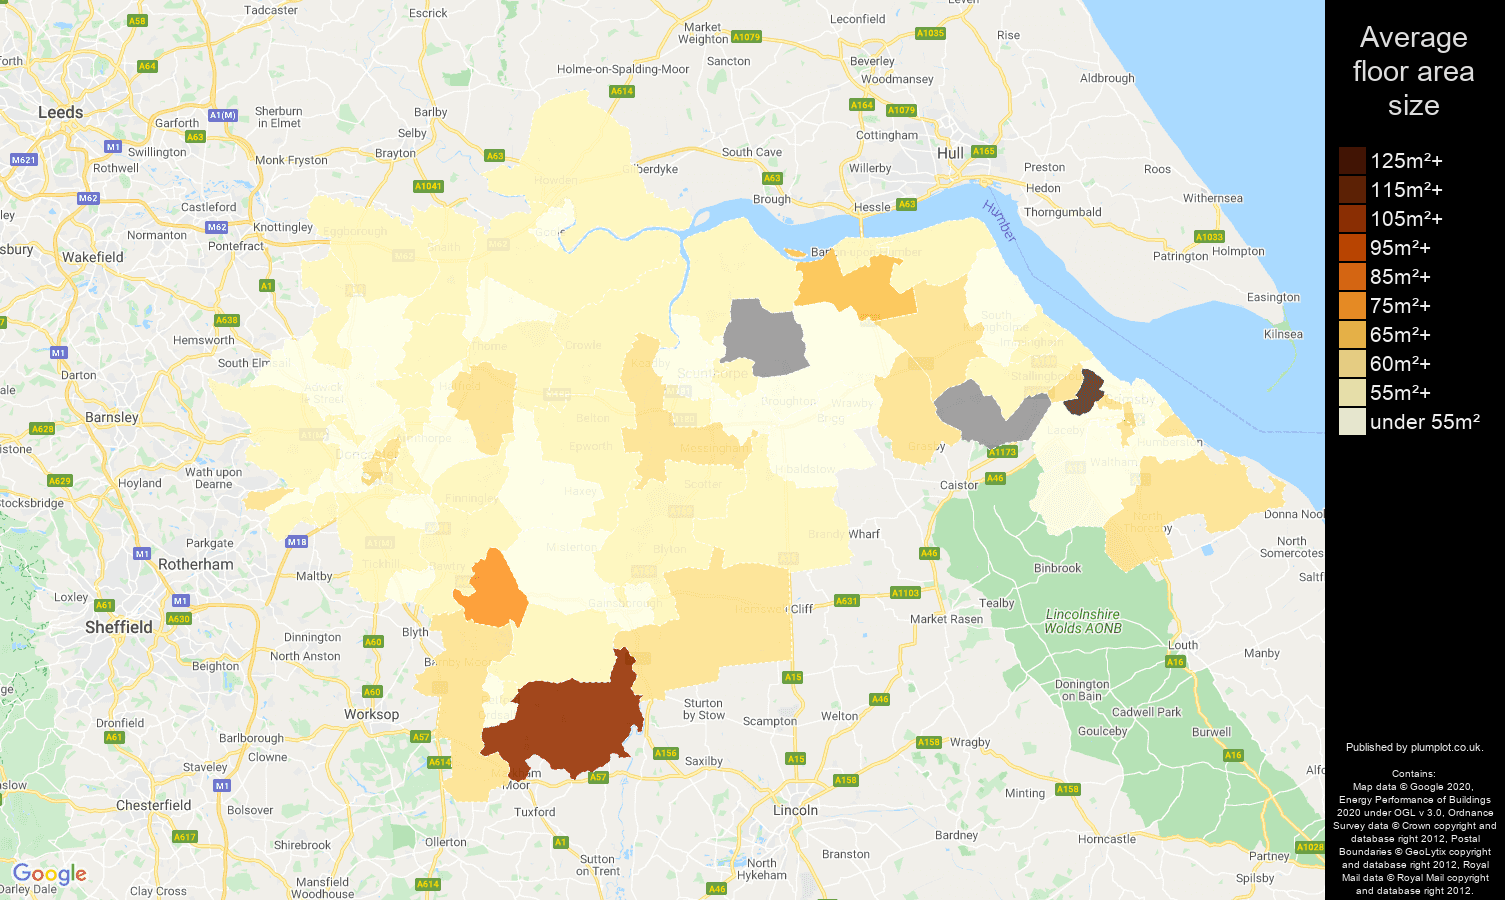 Doncaster map of average floor area size of flats